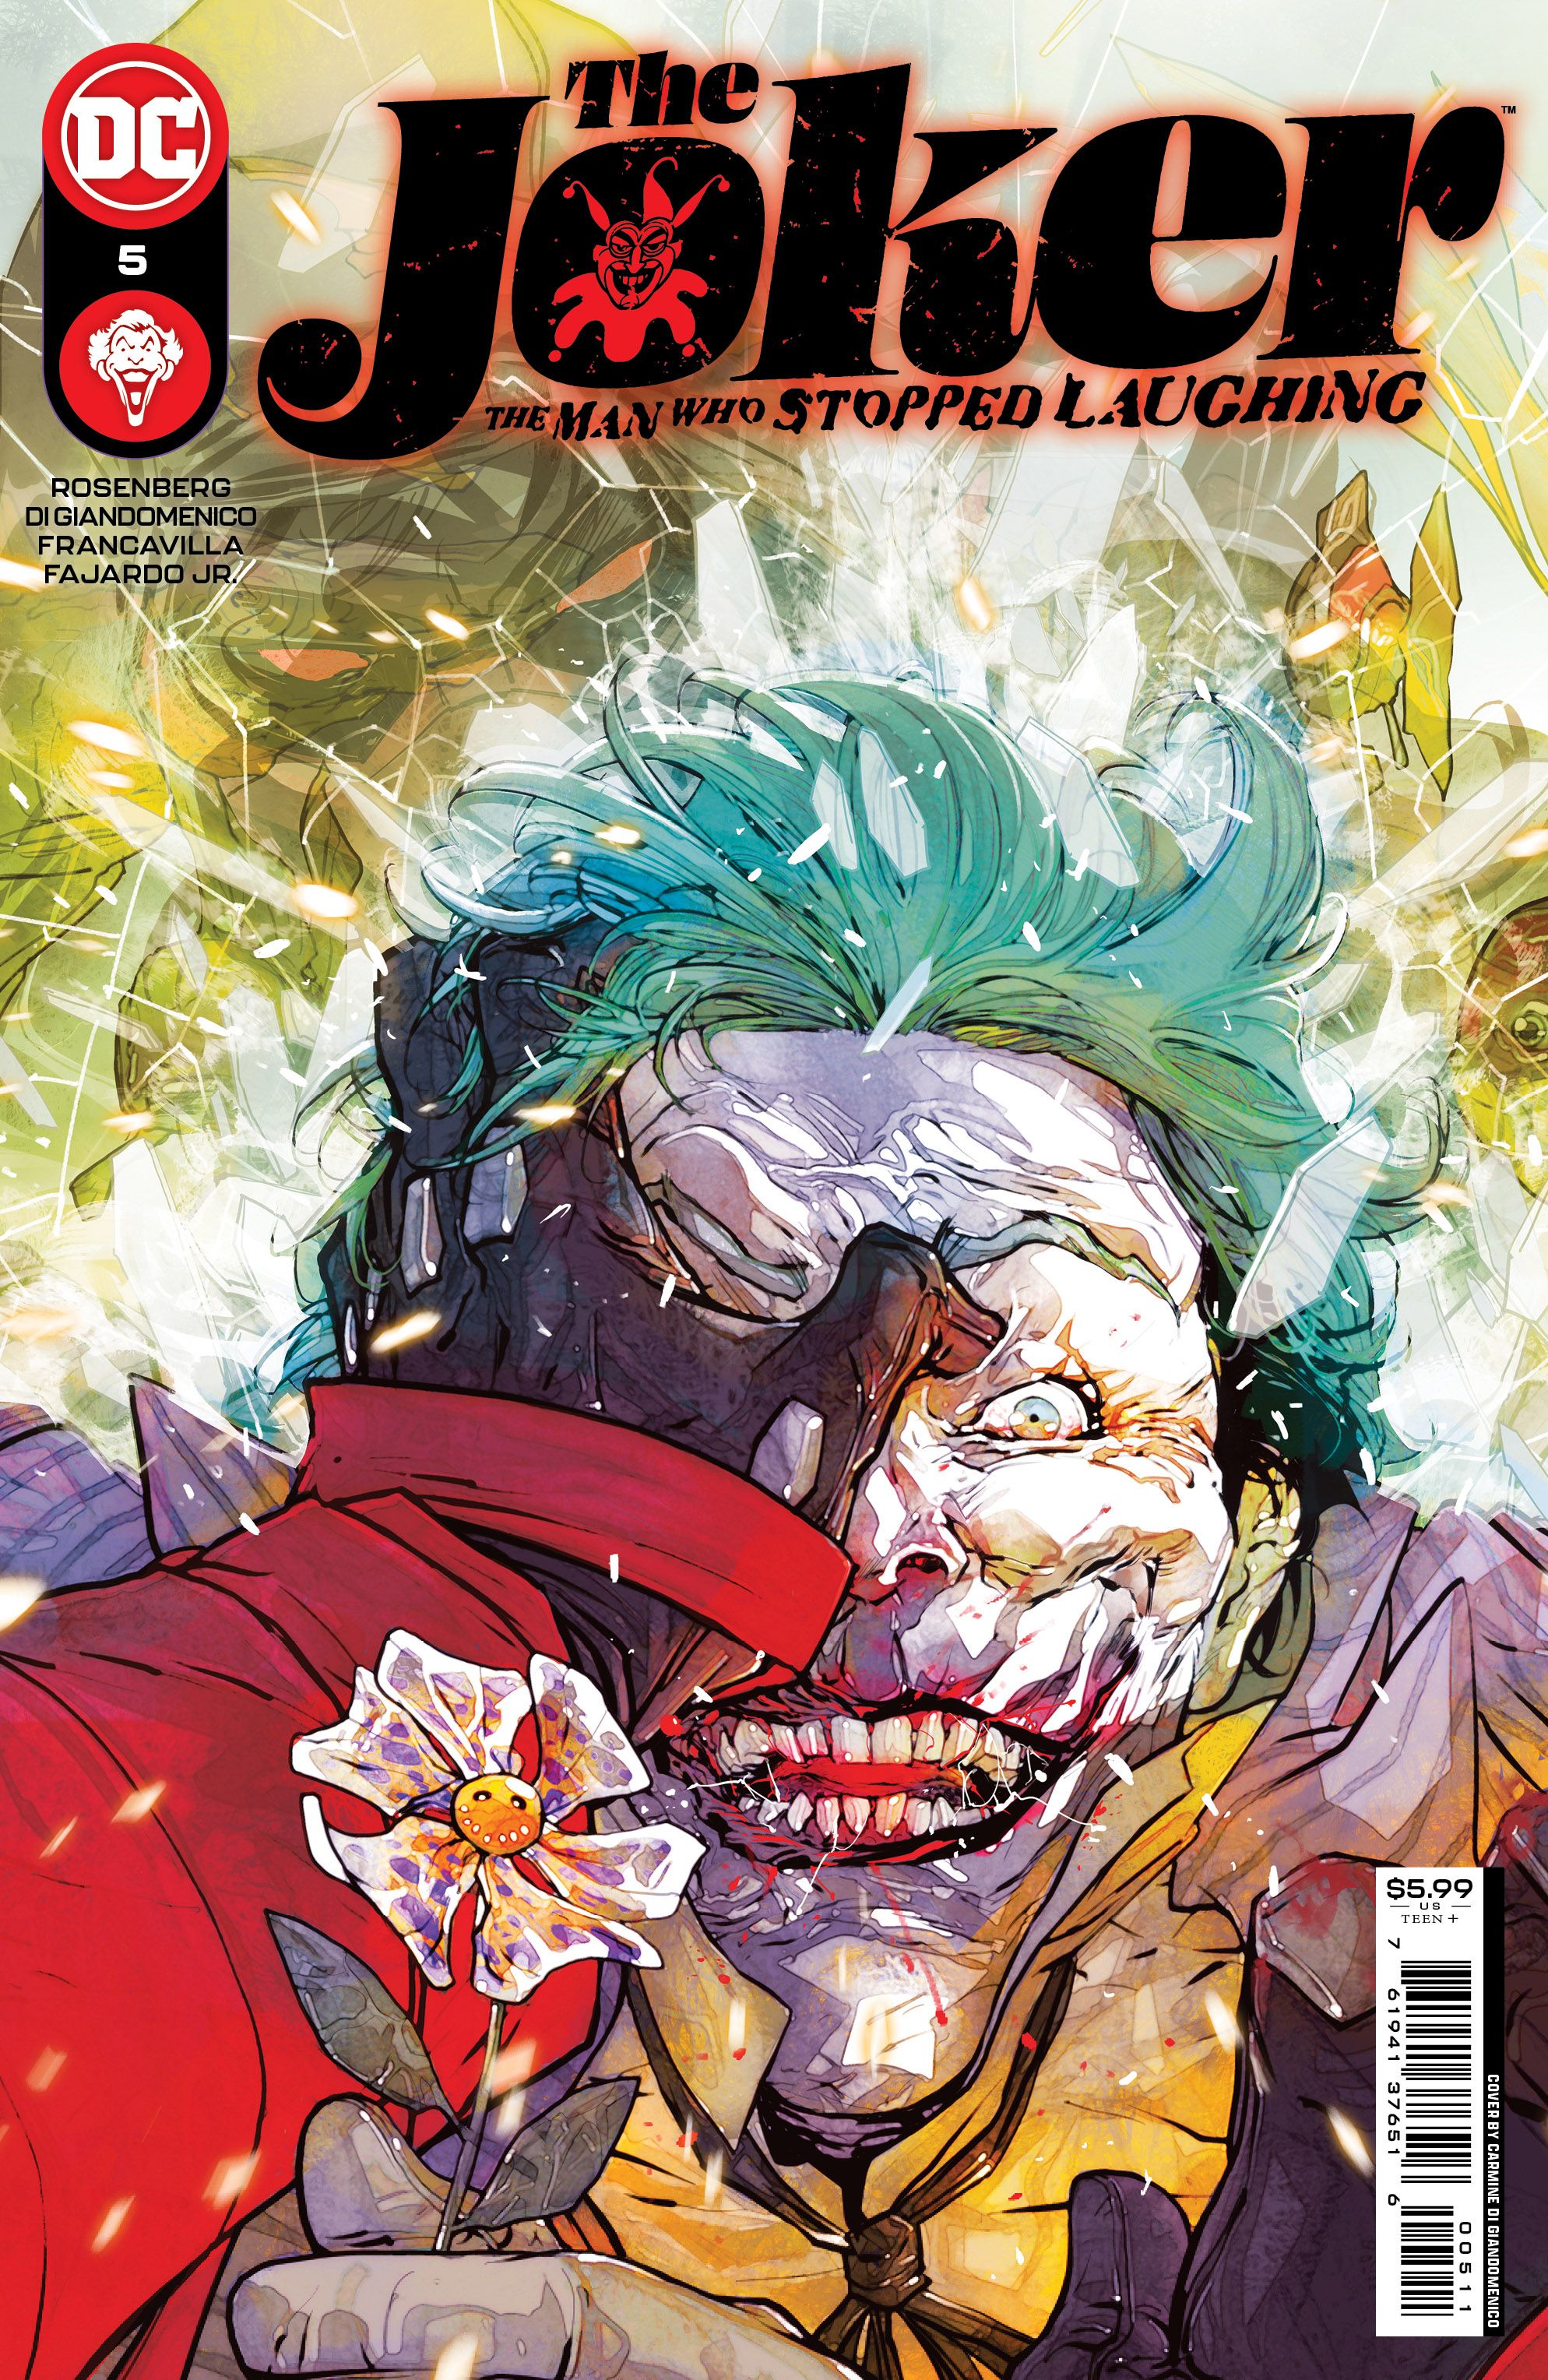 Joker: The Man Who Stopped Laughing #5 Comic